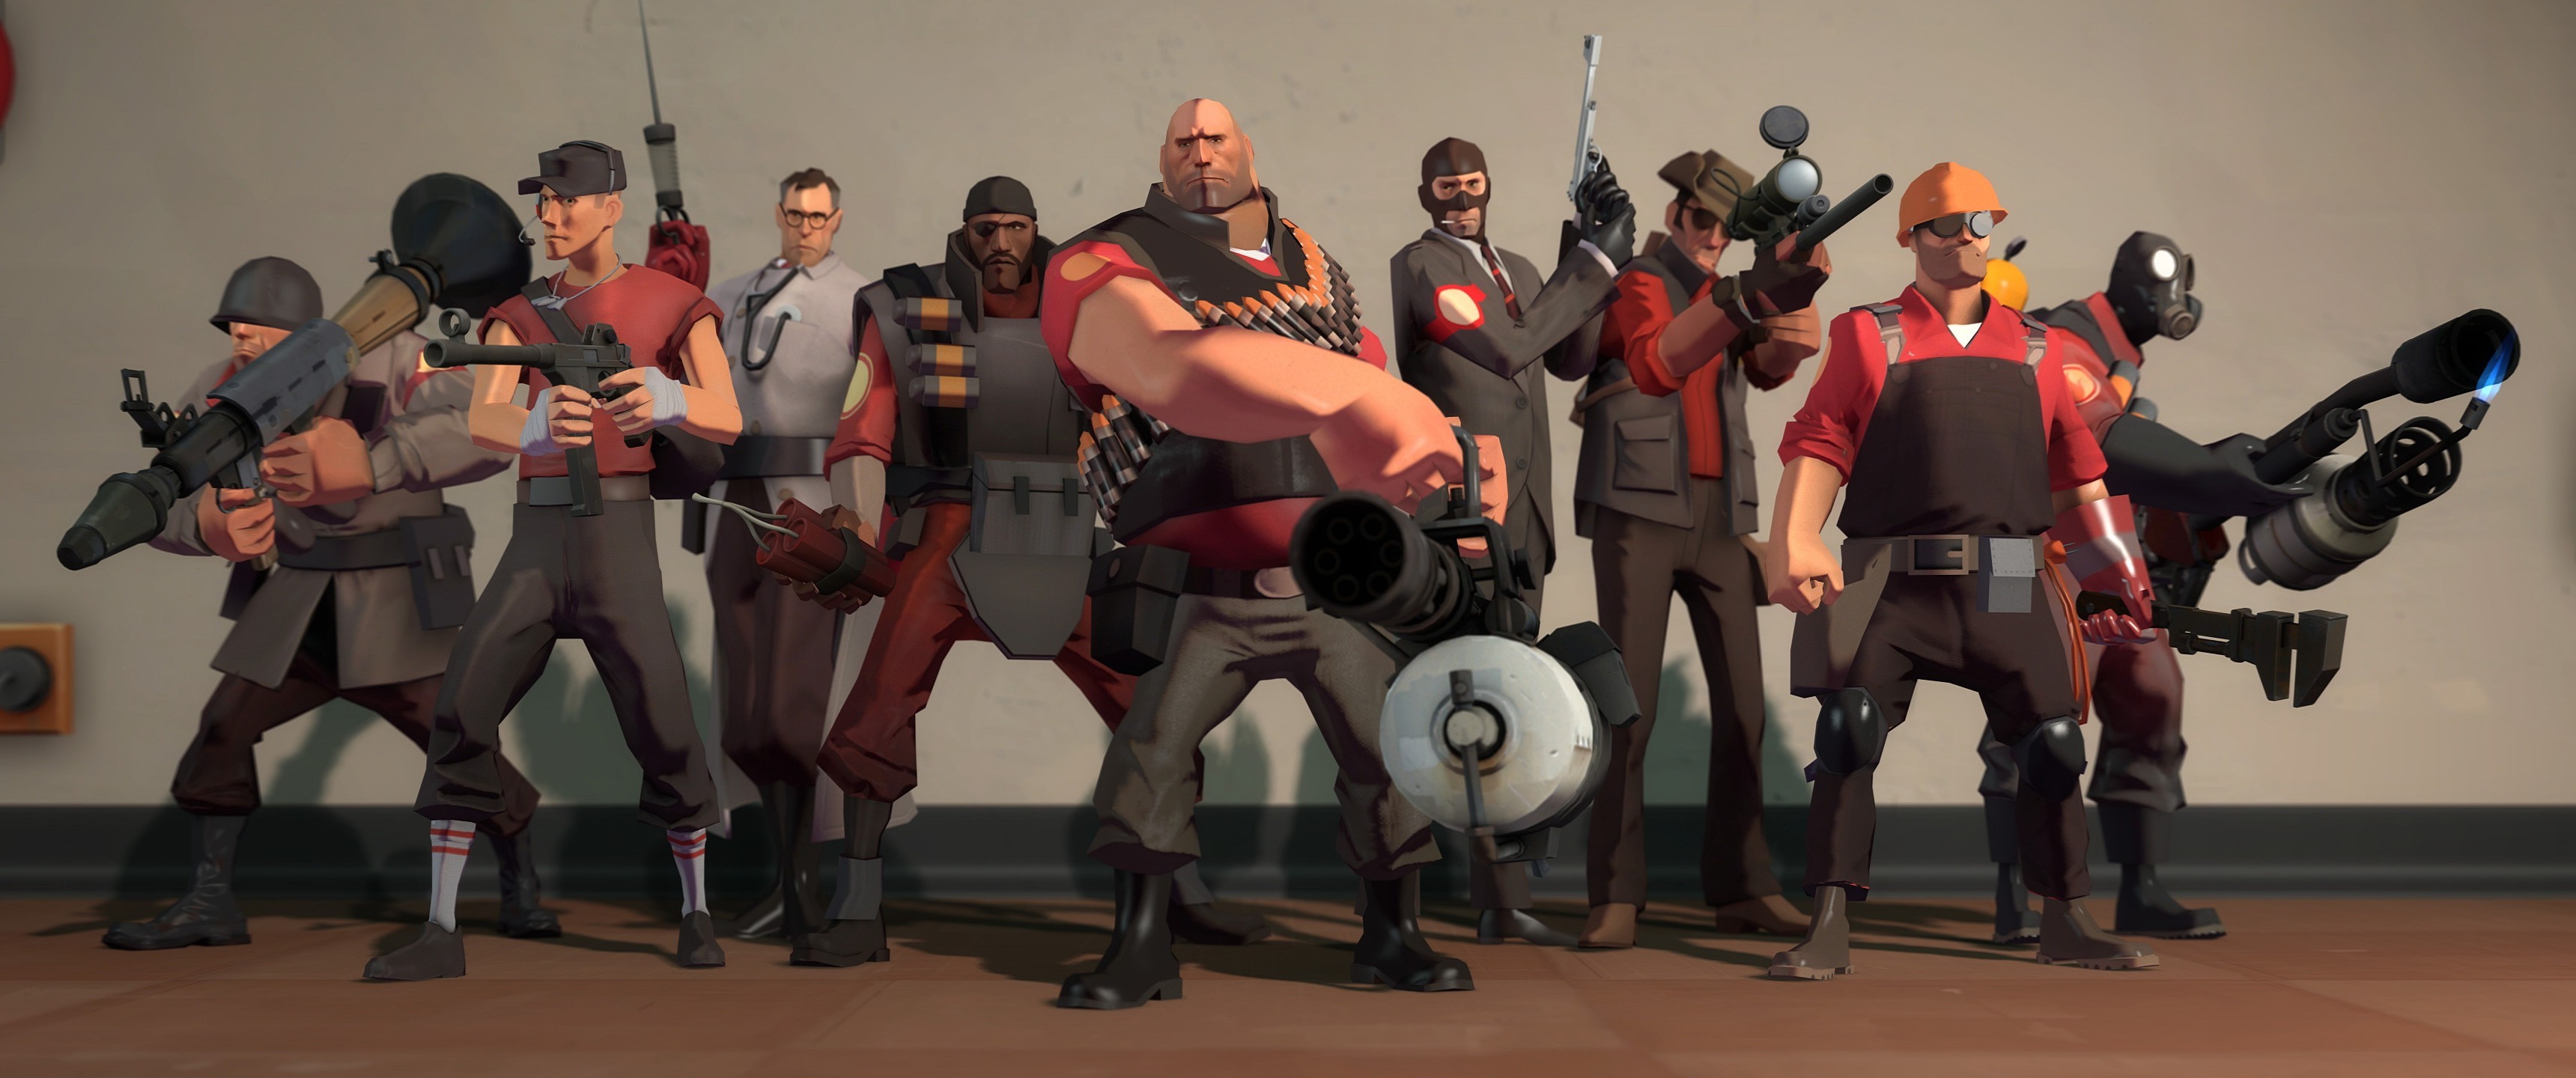 Team Fortress 2 download the last version for android